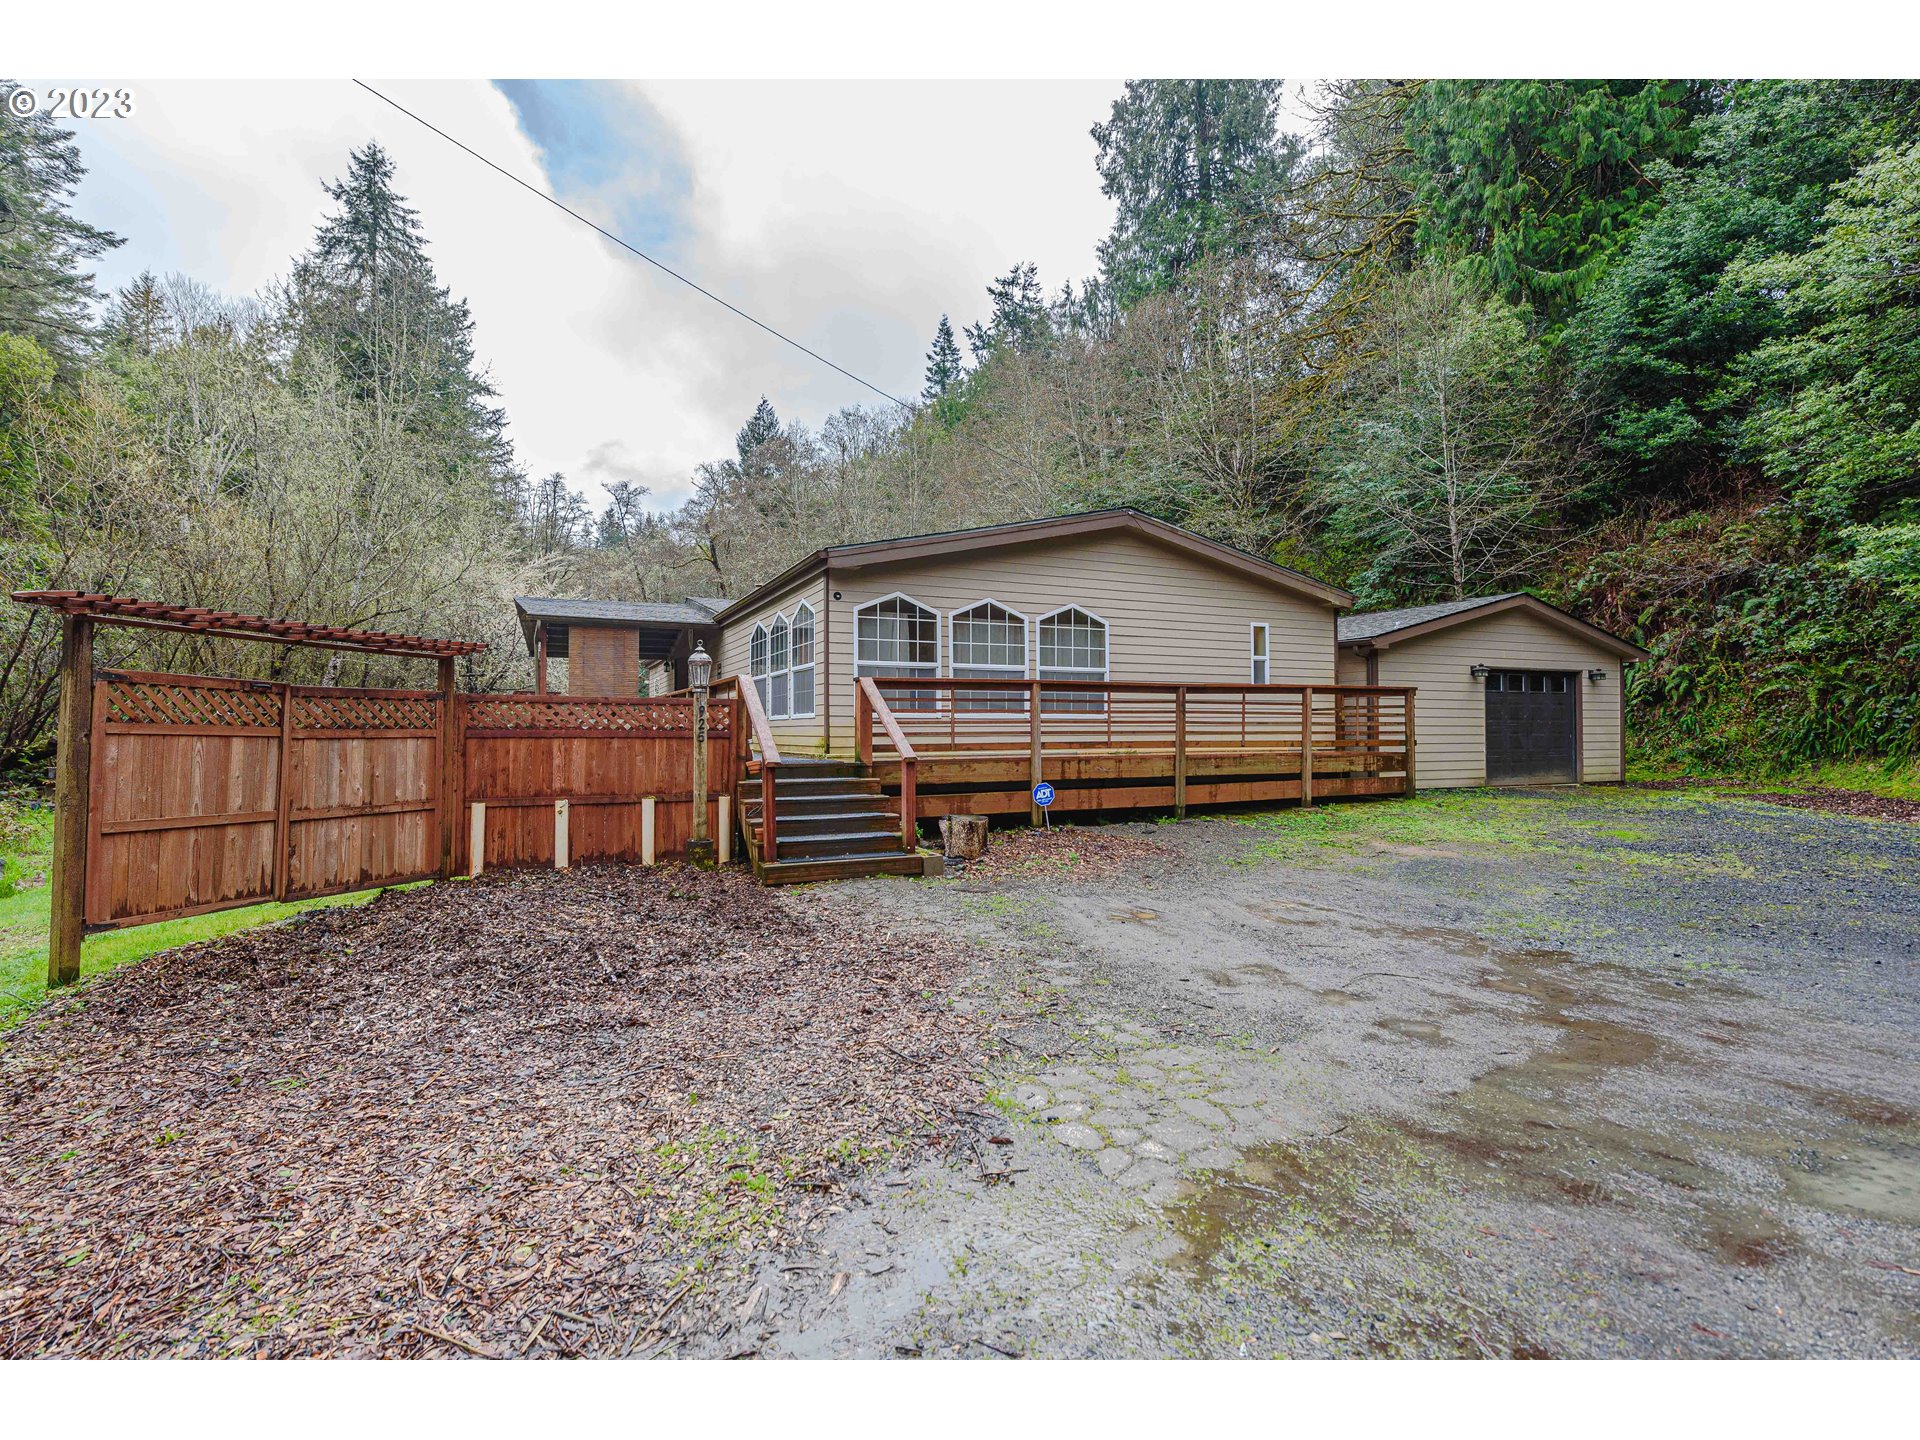 925 E 3RD ST, Coquille, OR 97423